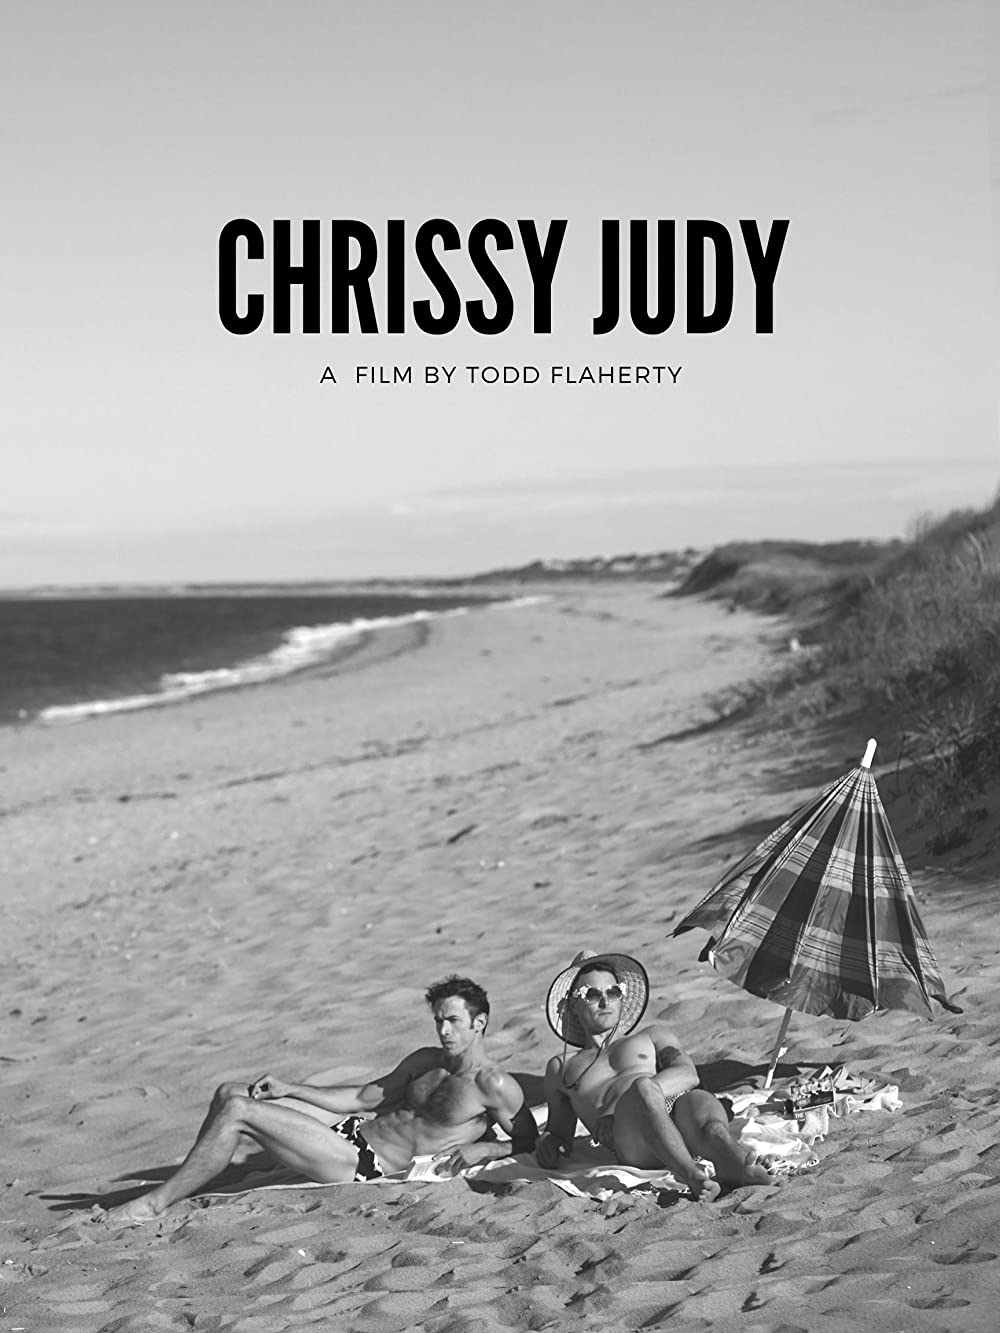 Lesbian Nude Beach Porn - Chrissy Judy: A Film Review - The Gay & Lesbian Review